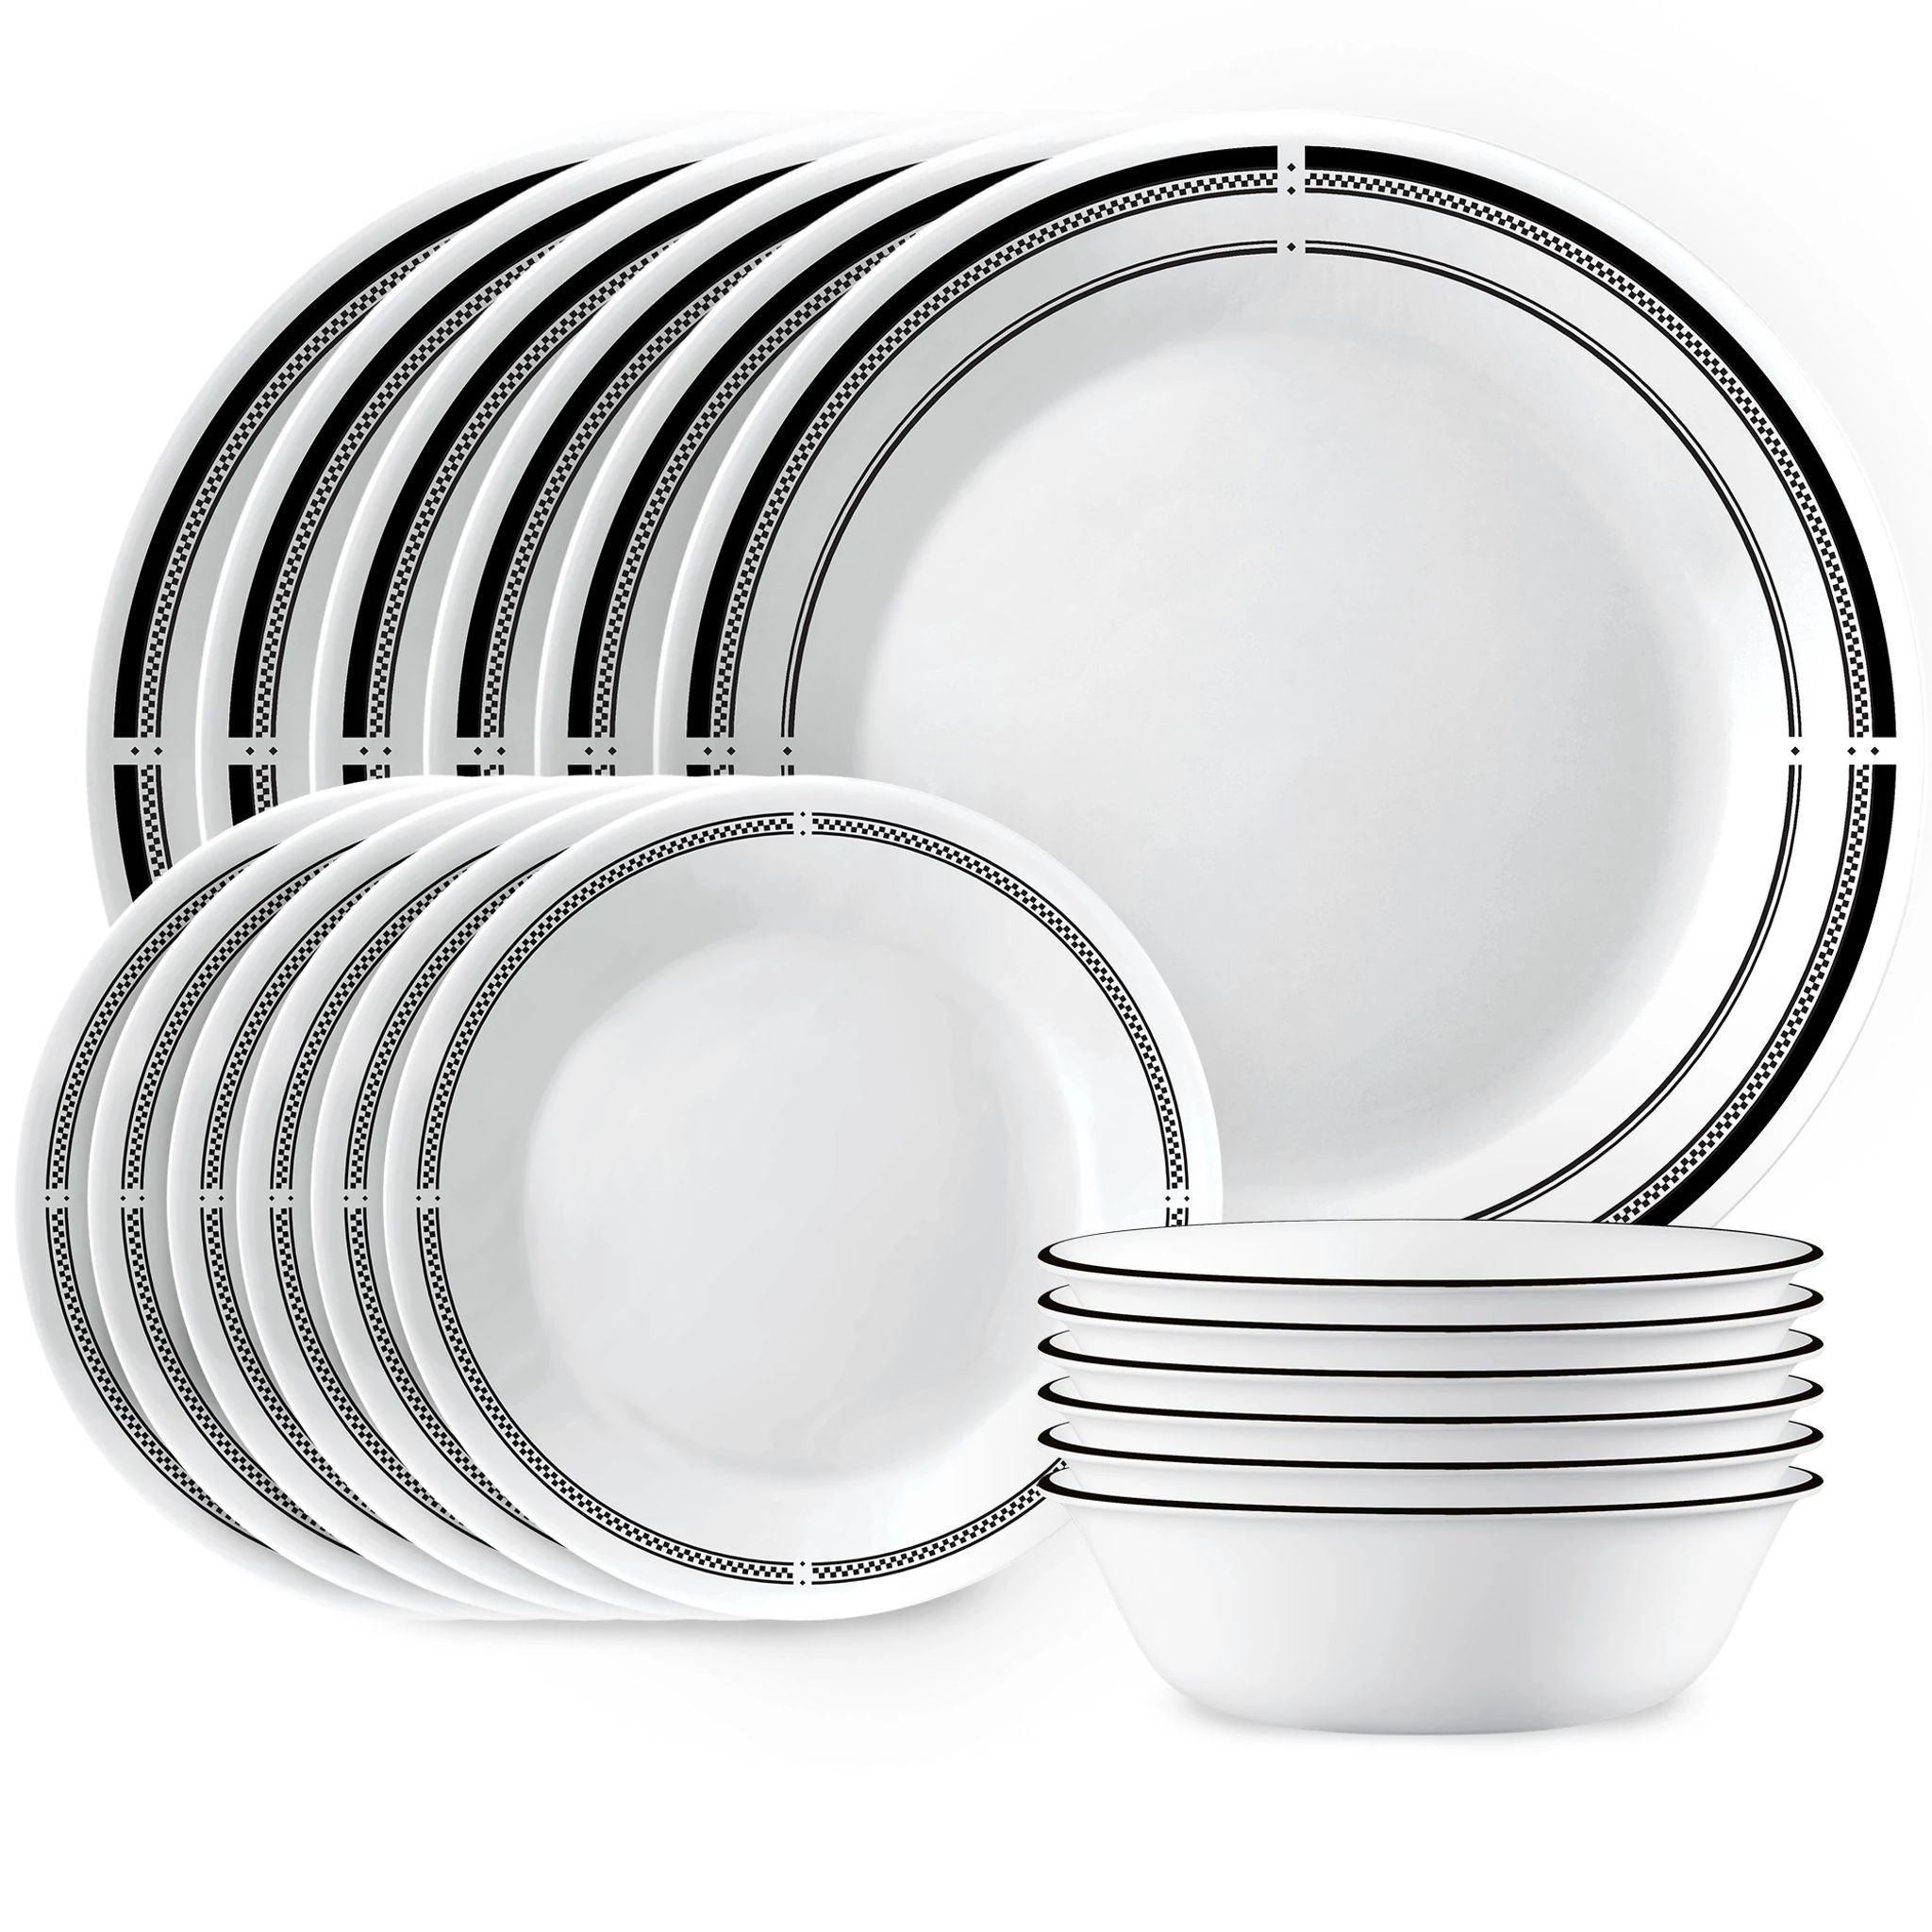 Brasserie All-White Porcelain Dinnerware Collection + Place Setting